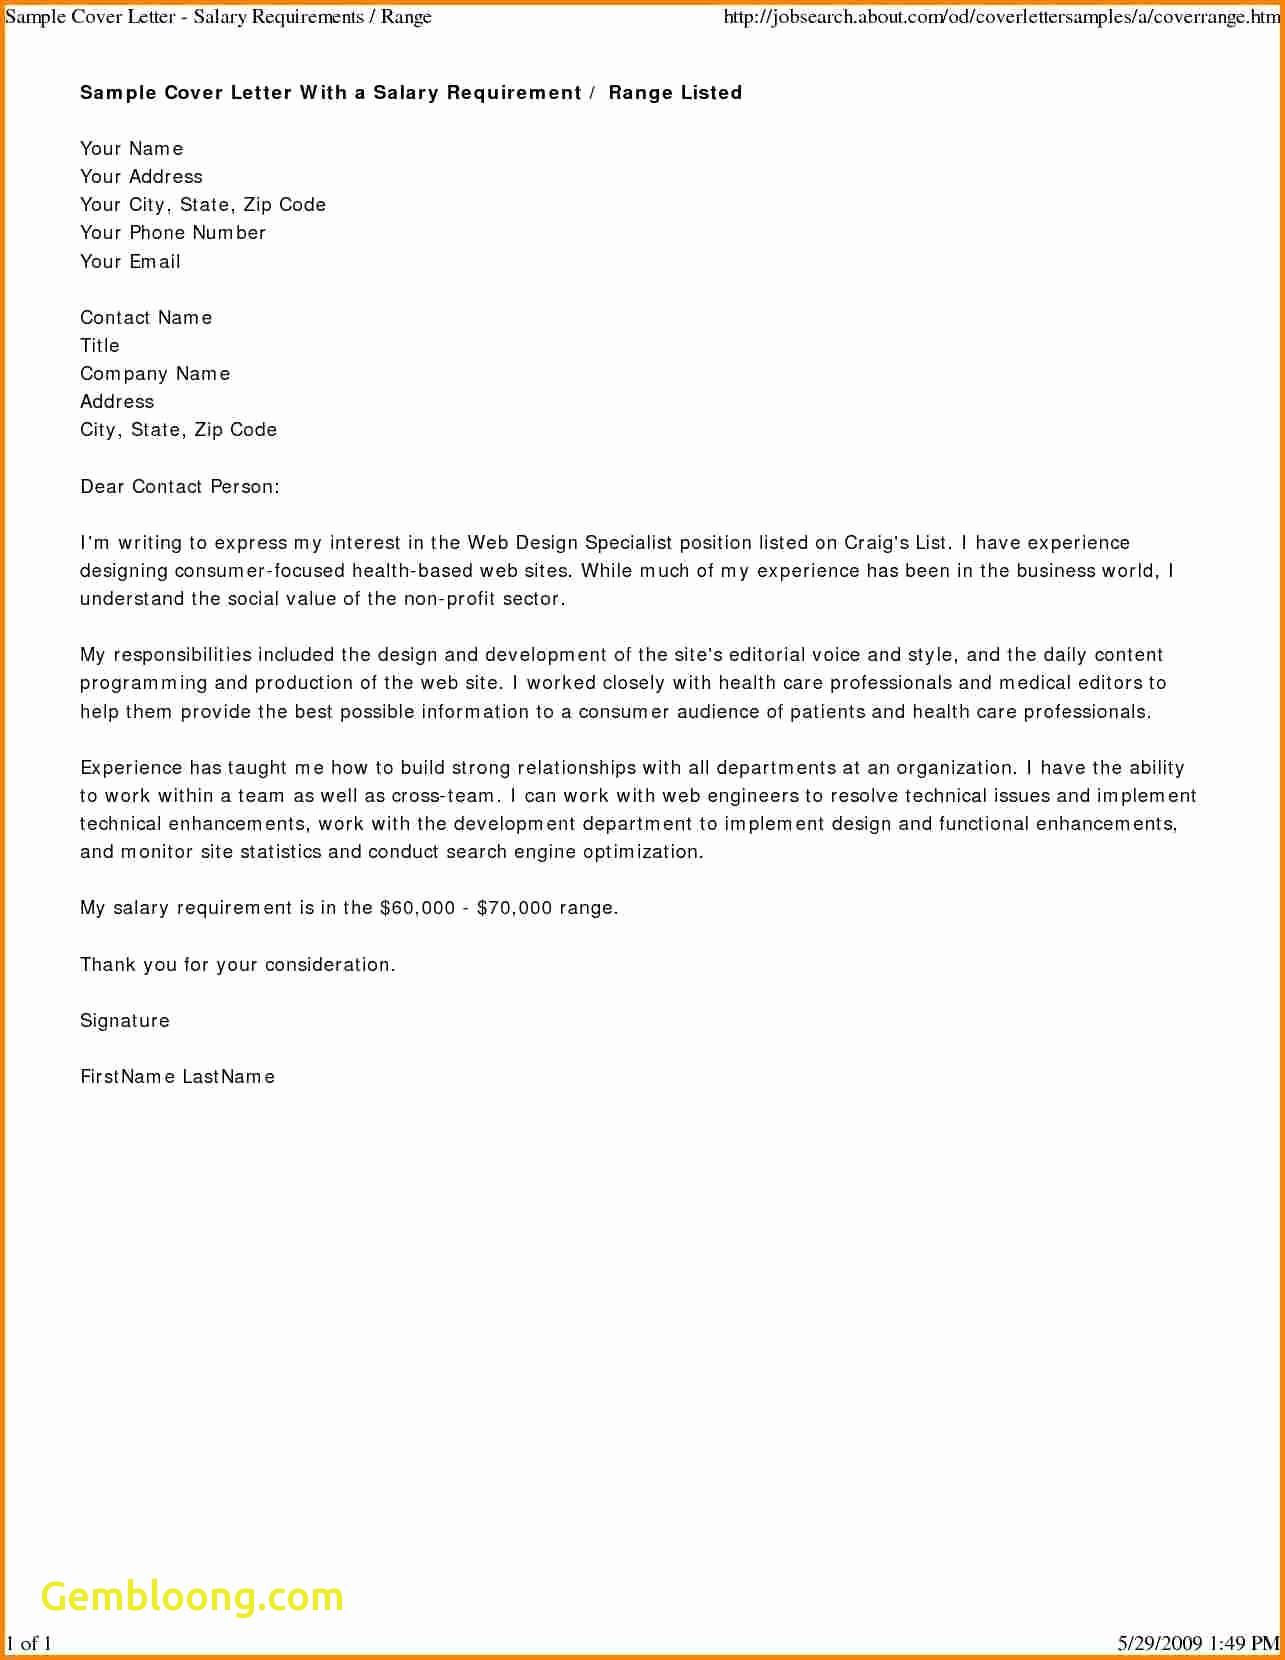 proof of no income letter template example-Proof In e Letter Sample Fresh Job Verification Letter format Elegant Inspirational Salary Increase 15-t